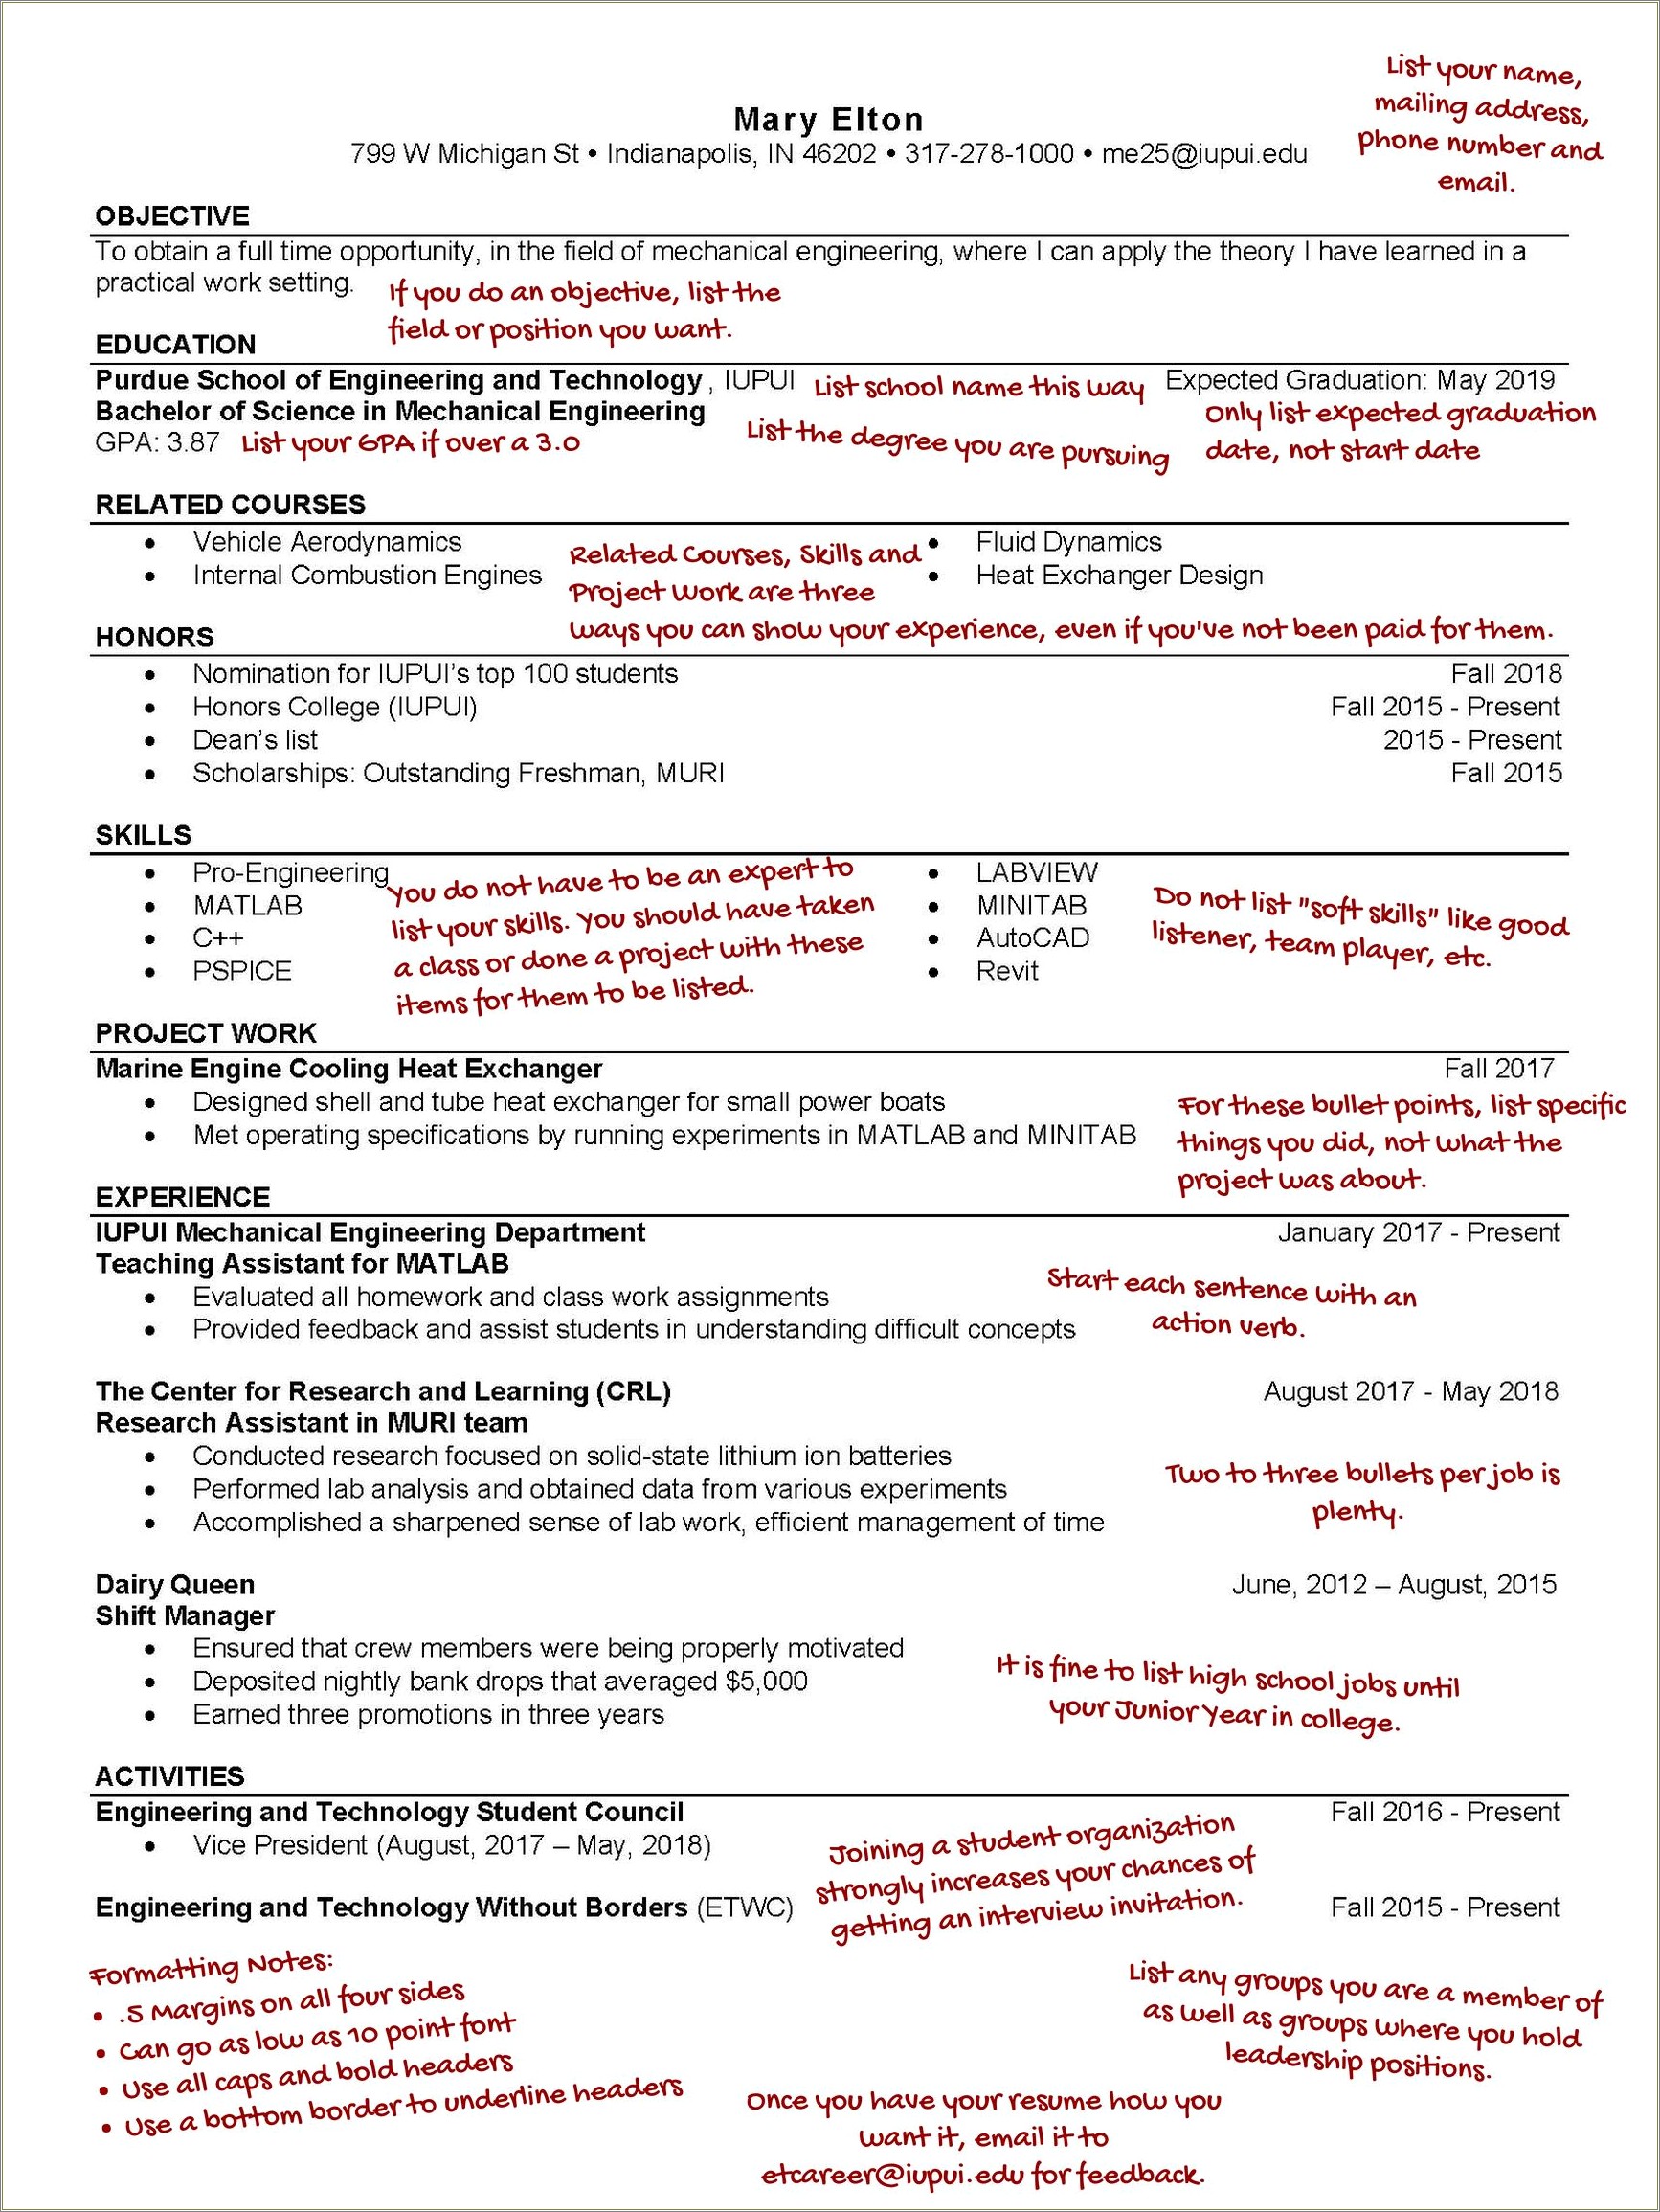 Examples Of Headers On An Education Resume